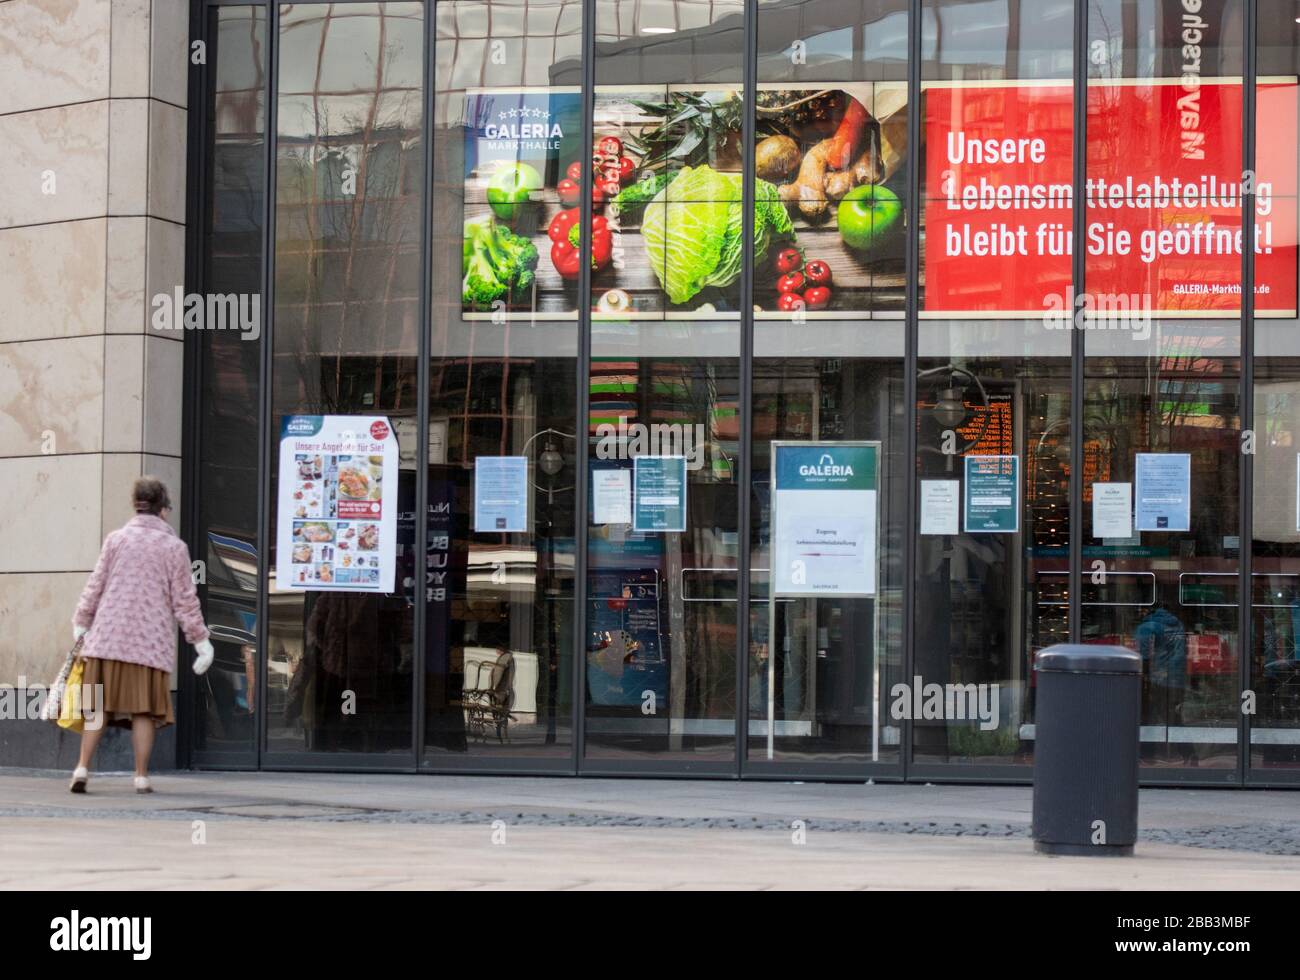 30 March 2020, North Rhine-Westphalia, Dortmund: A large LED screen in the entrance area of a Karstadt department store indicates that the food department is still open. However, the entrance is only possible via designated entrances. The department store group Galeria Karstadt Kaufhof continues to wait for government aid. The business in the department stores is largely, but not completely, at rest. Around 50 food departments of the company are still open. Photo: Bernd Thissen/dpa Stock Photo